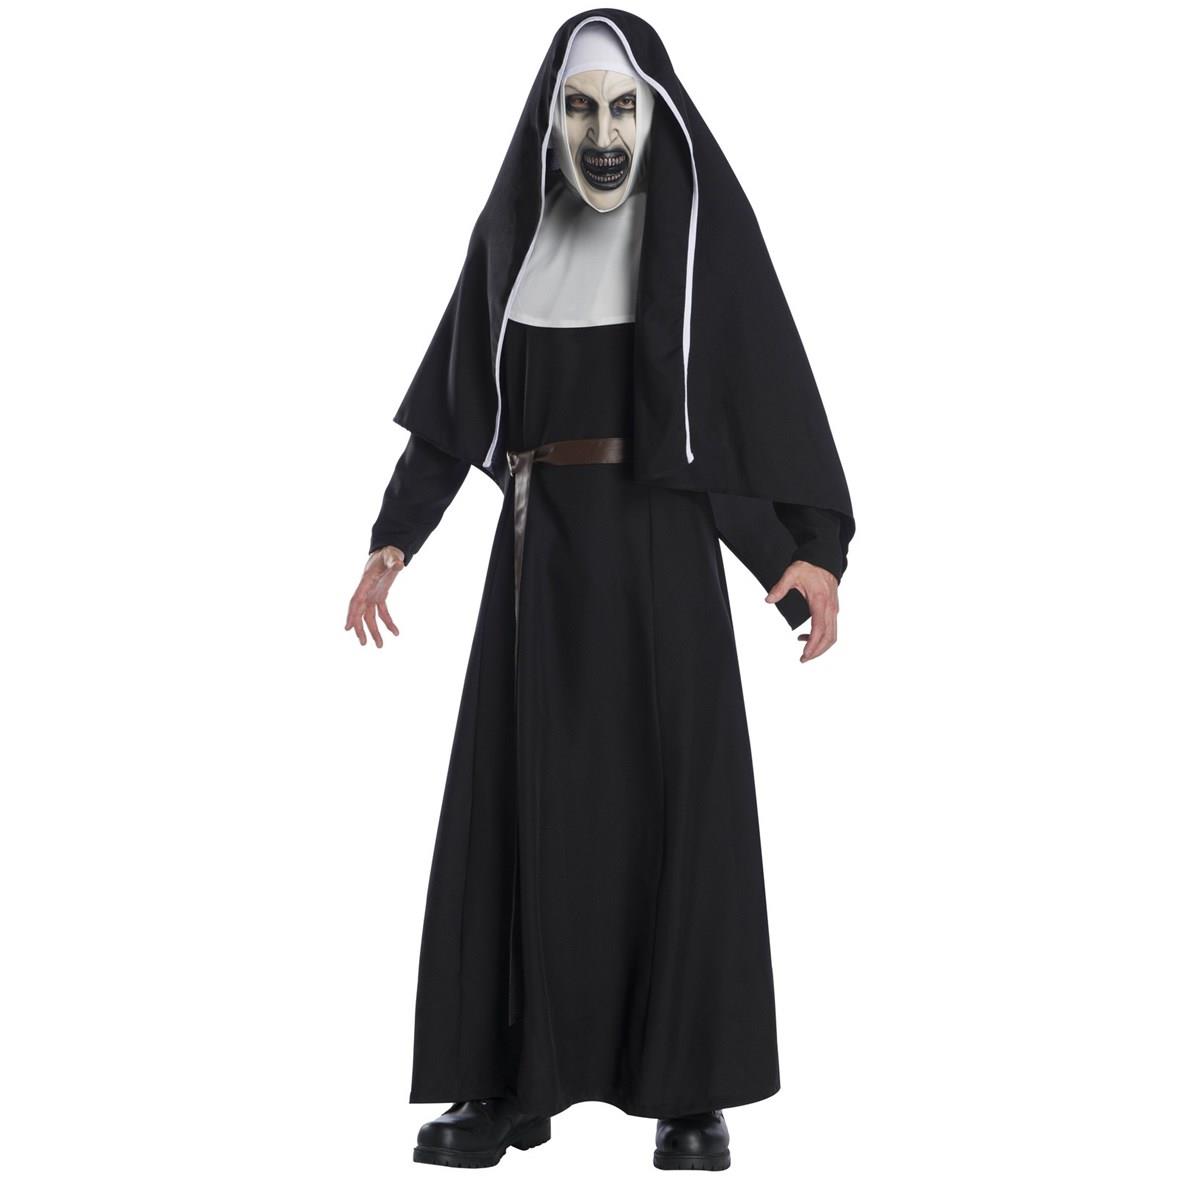 279830 The Nun Movie Deluxe Adult Costume, Extra Large